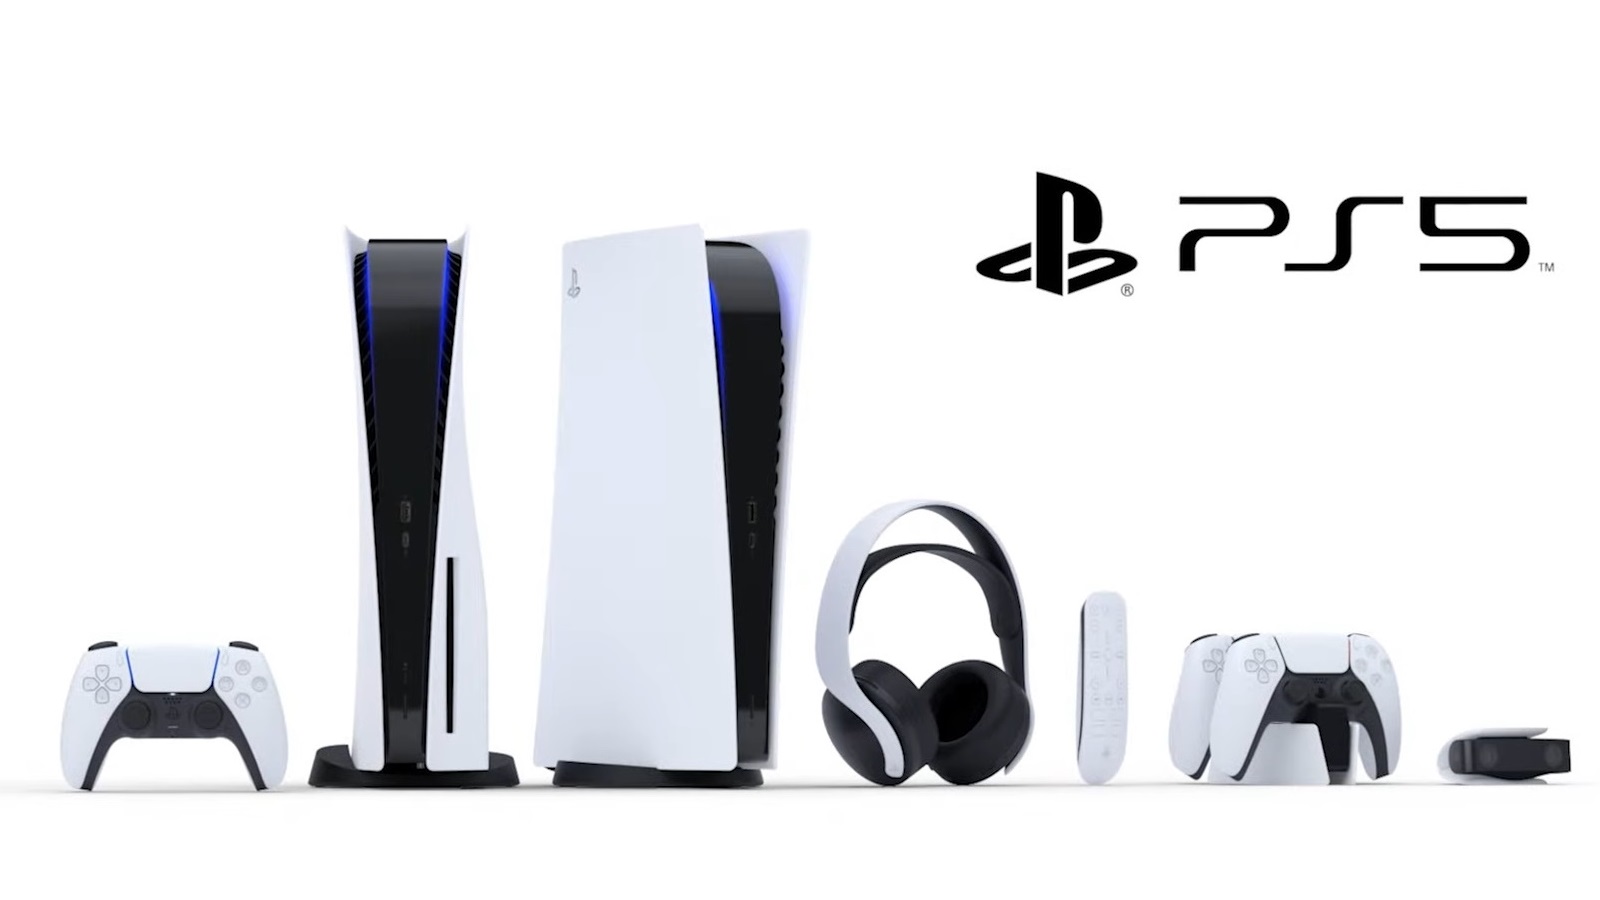 The PlayStation 5 amongst various peripherals like controllers and headsets.